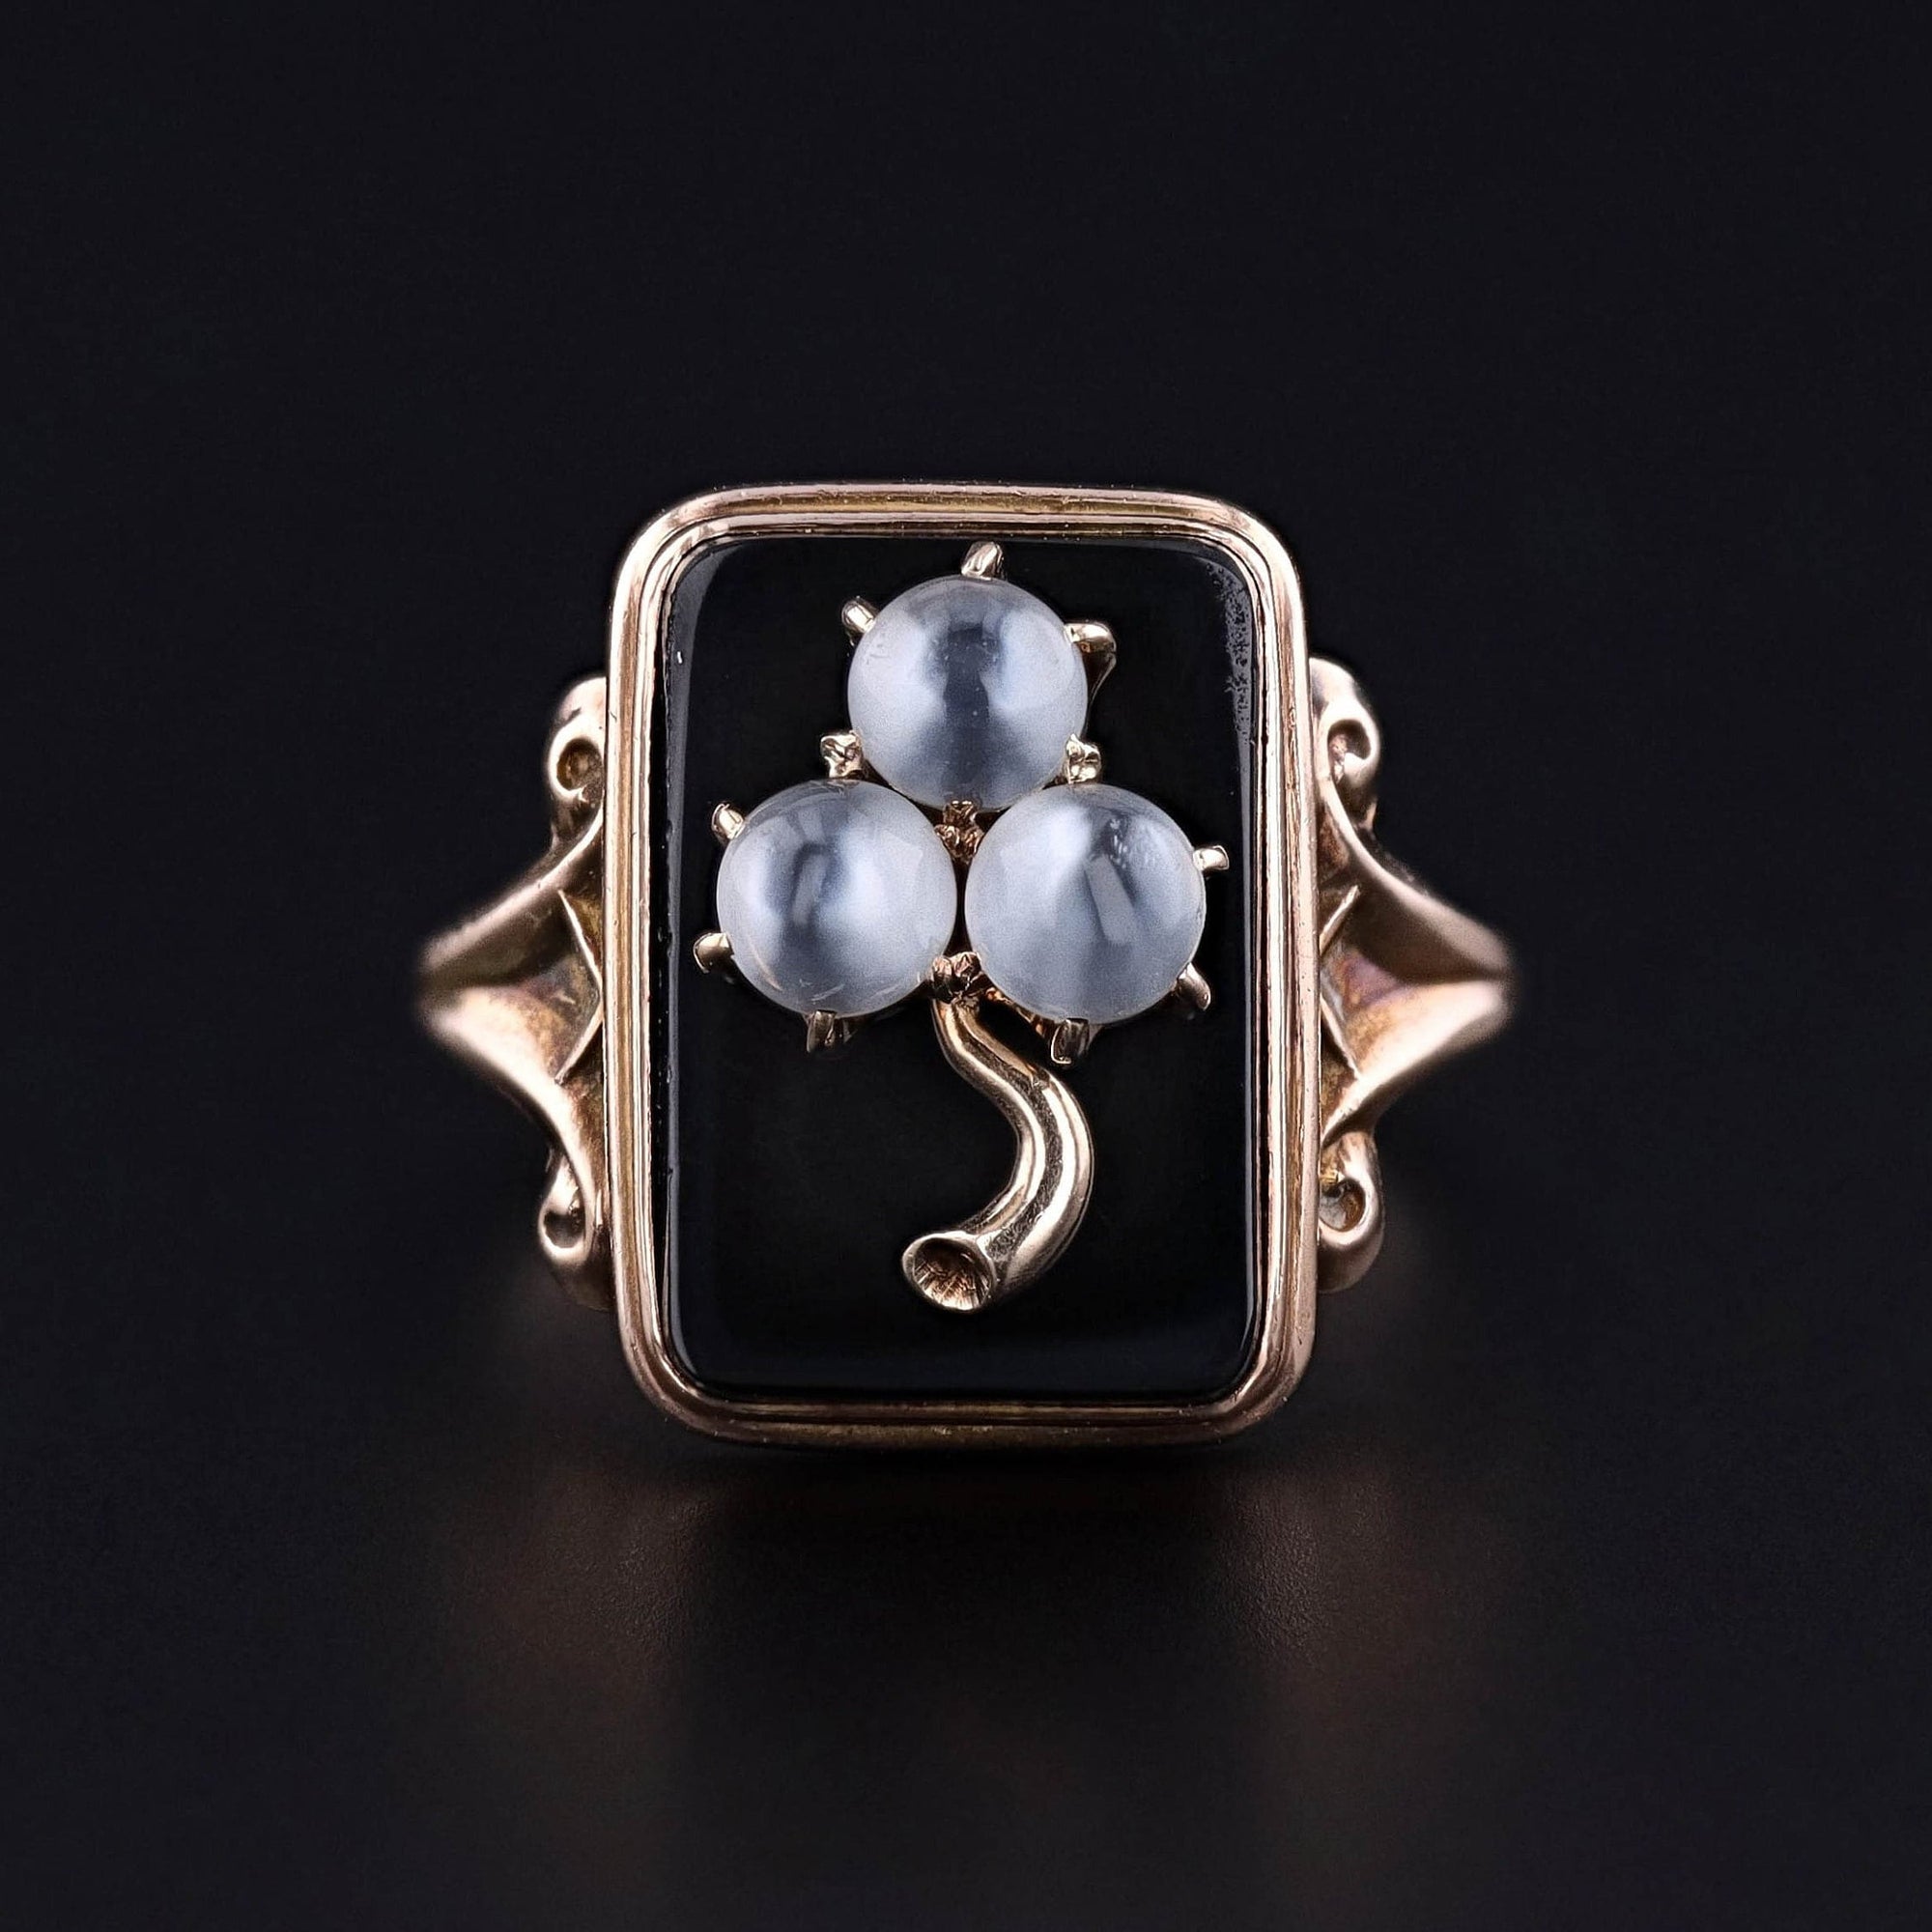 Antique Moonstone and Onyx Ring of 10k Gold